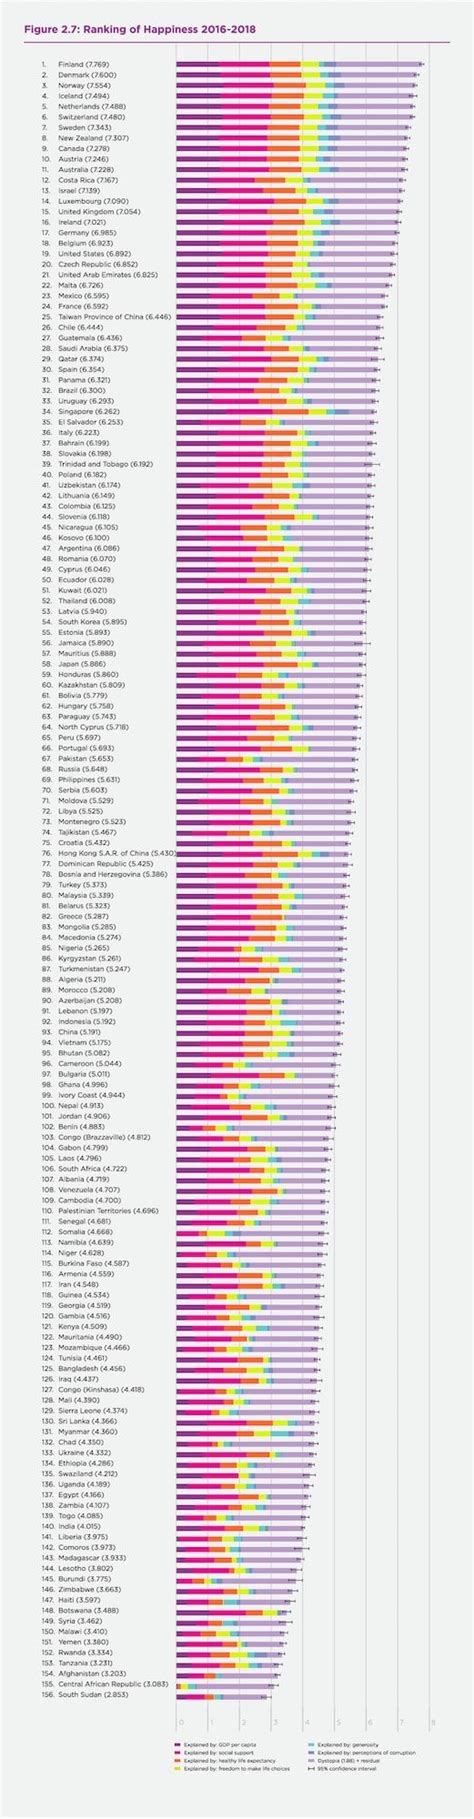 The Worlds Happiest Countries Ranked Digg World Happiness